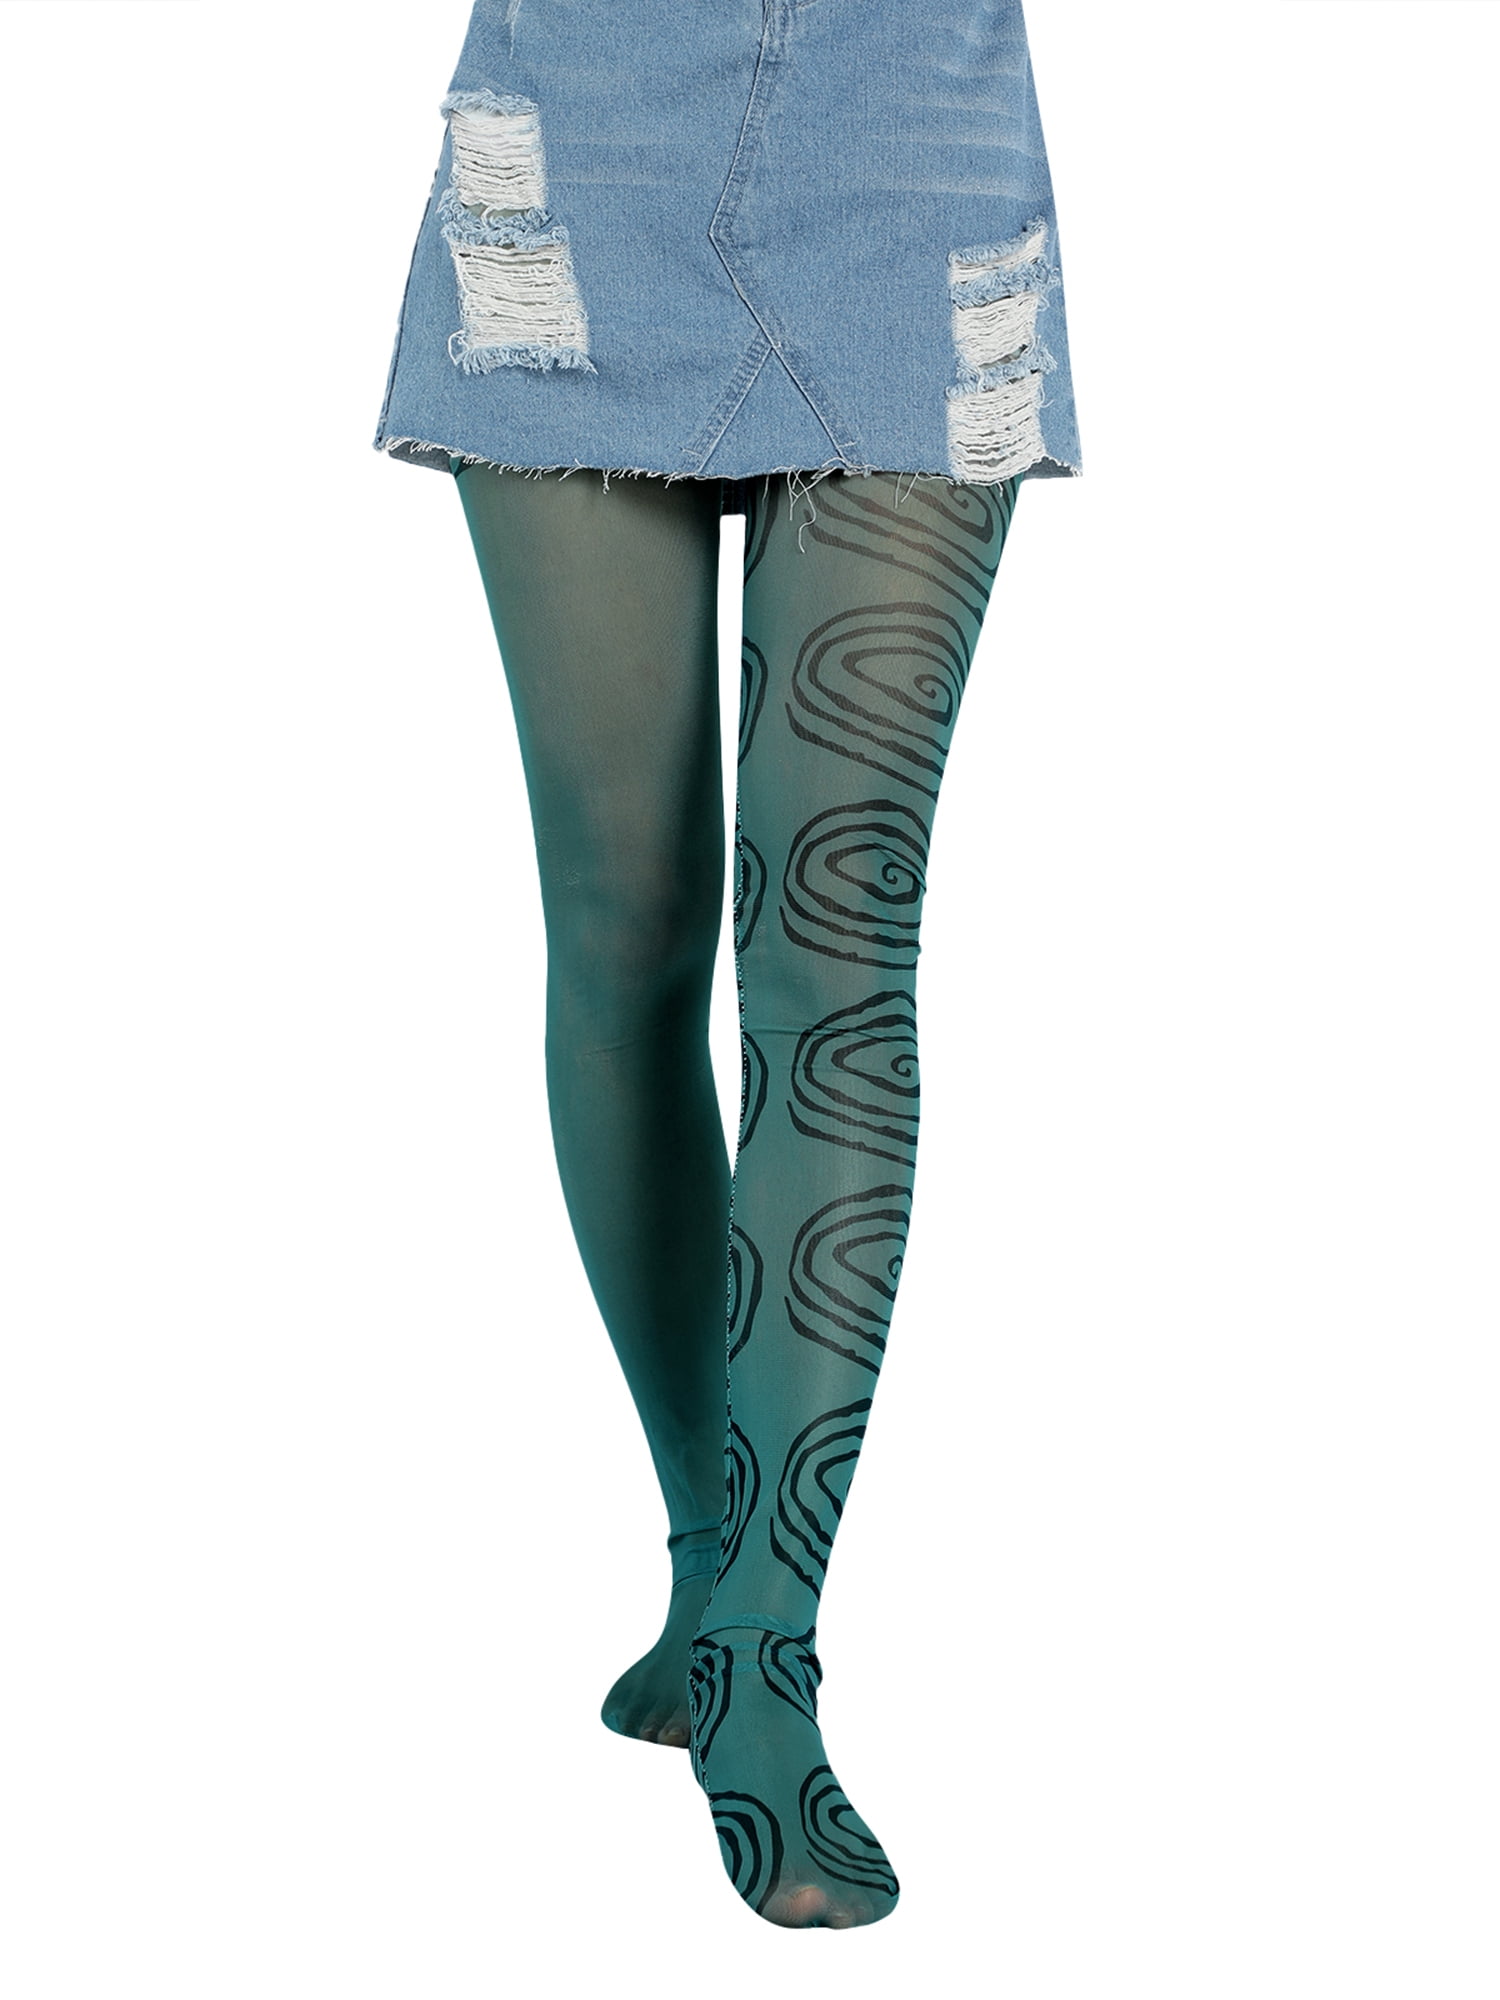 A woman wearing quirky, patterned tights with the shapes of leaves and  flowers on them Stock Photo - Alamy